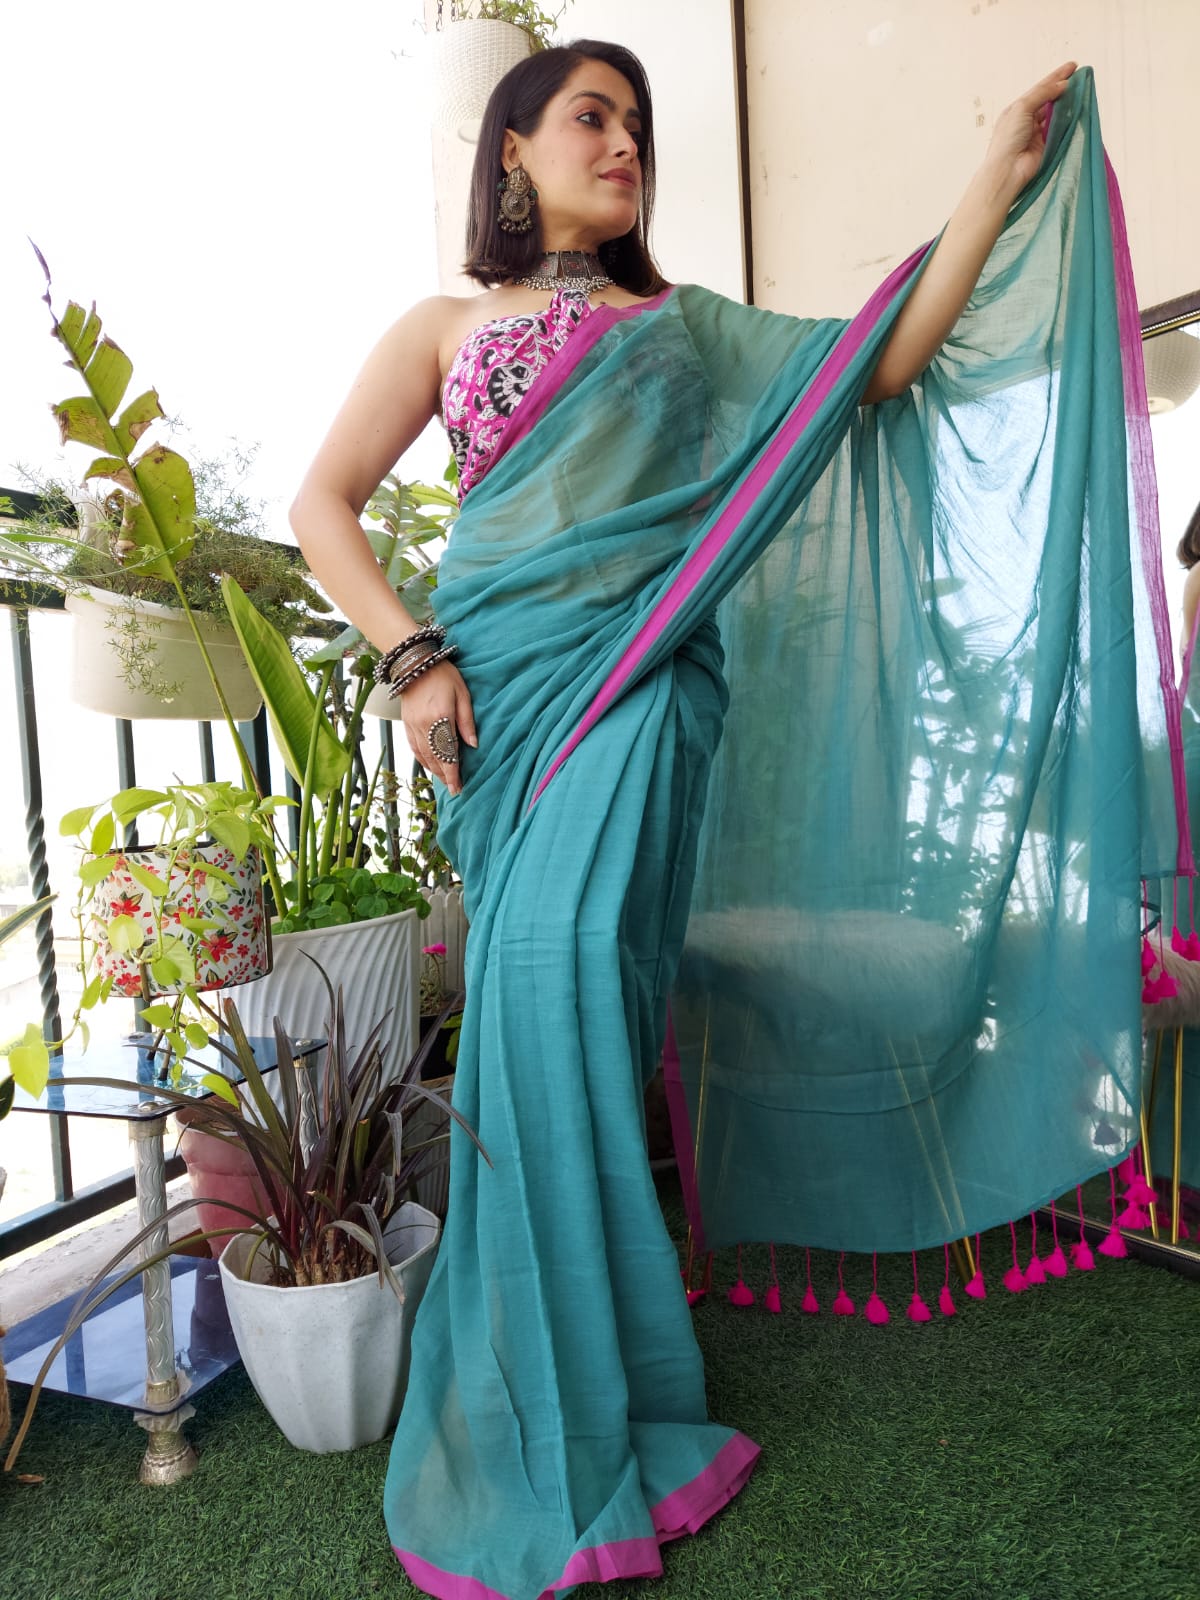 Mulmul (Malmal) Cotton Sarees From Rs 1000 Onwards